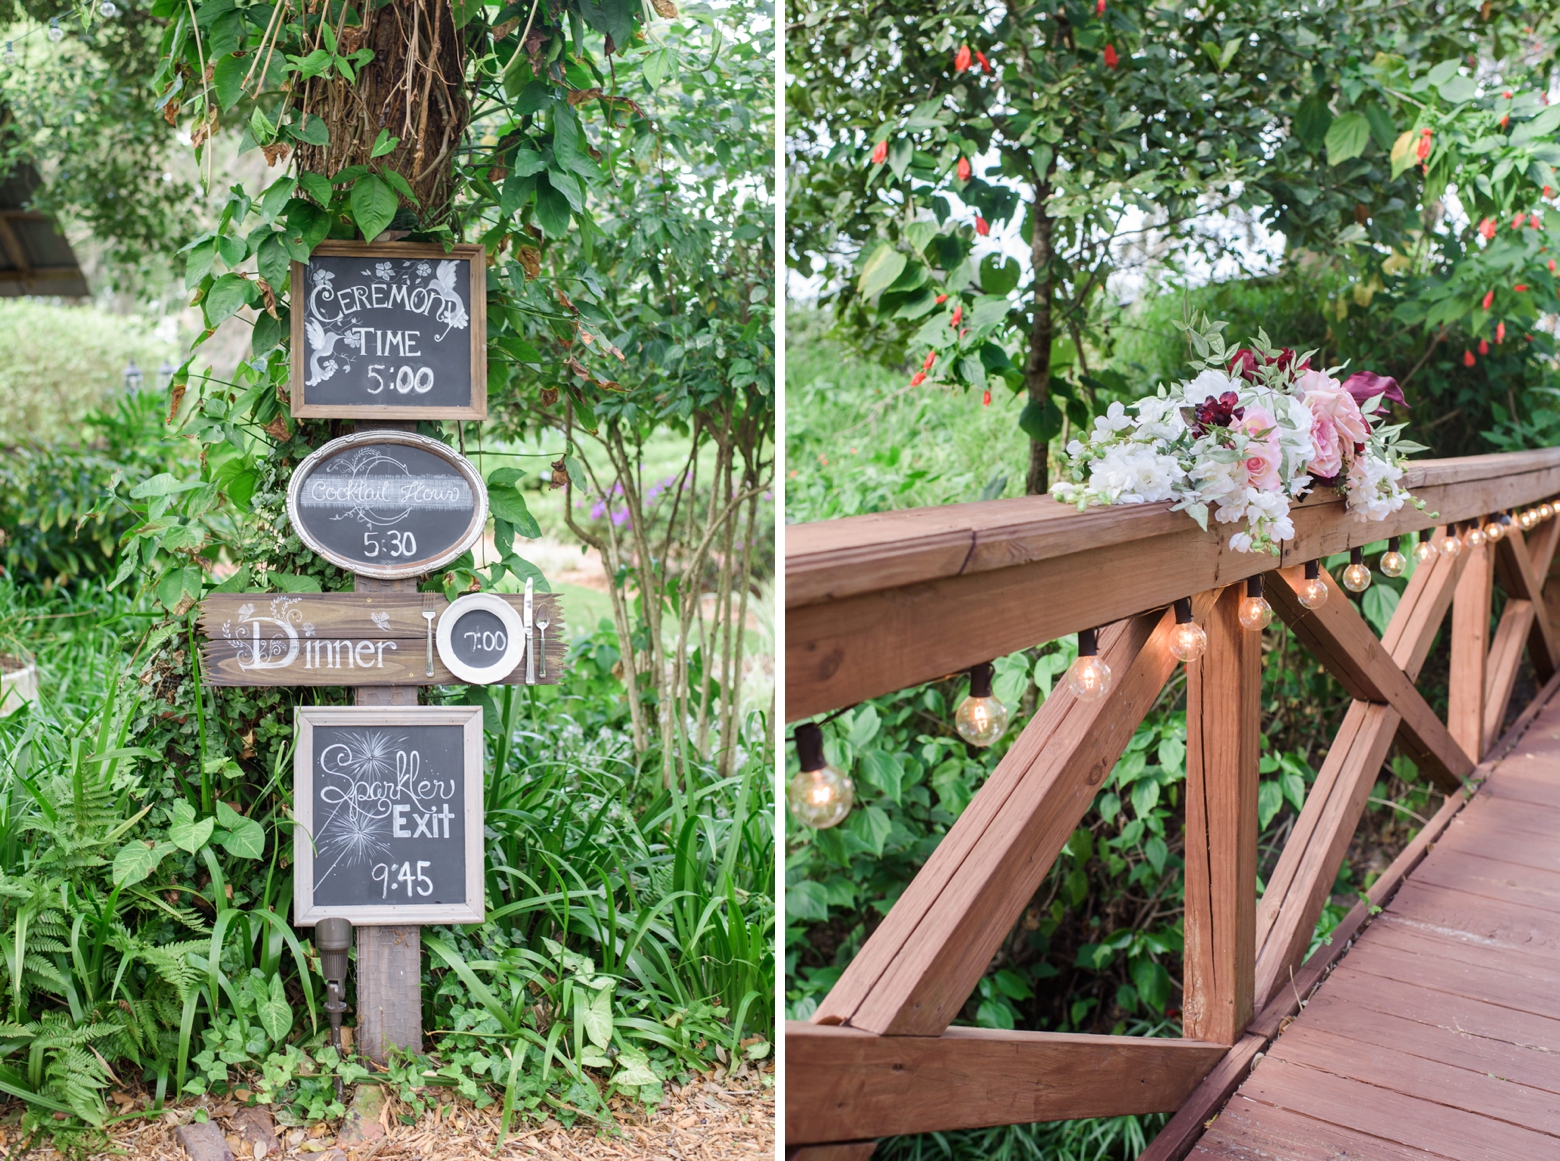 Reception details of the Cross Creek Ranch Wedding reception such as a sign for the times of events and a floral arrangement on the bridge